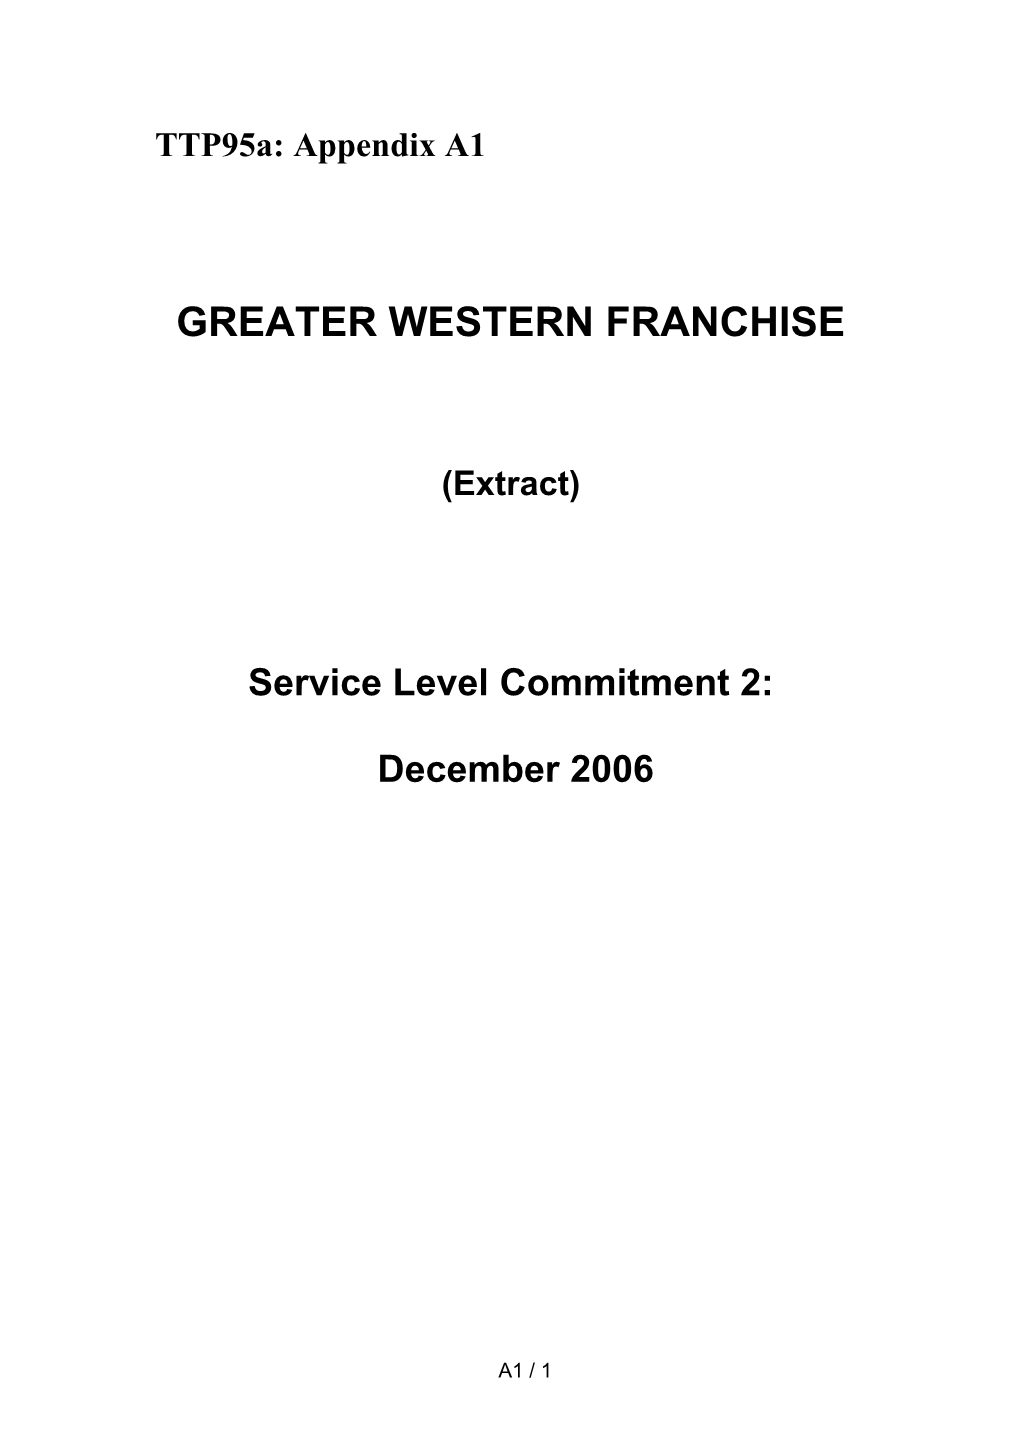 Greater Western Franchise